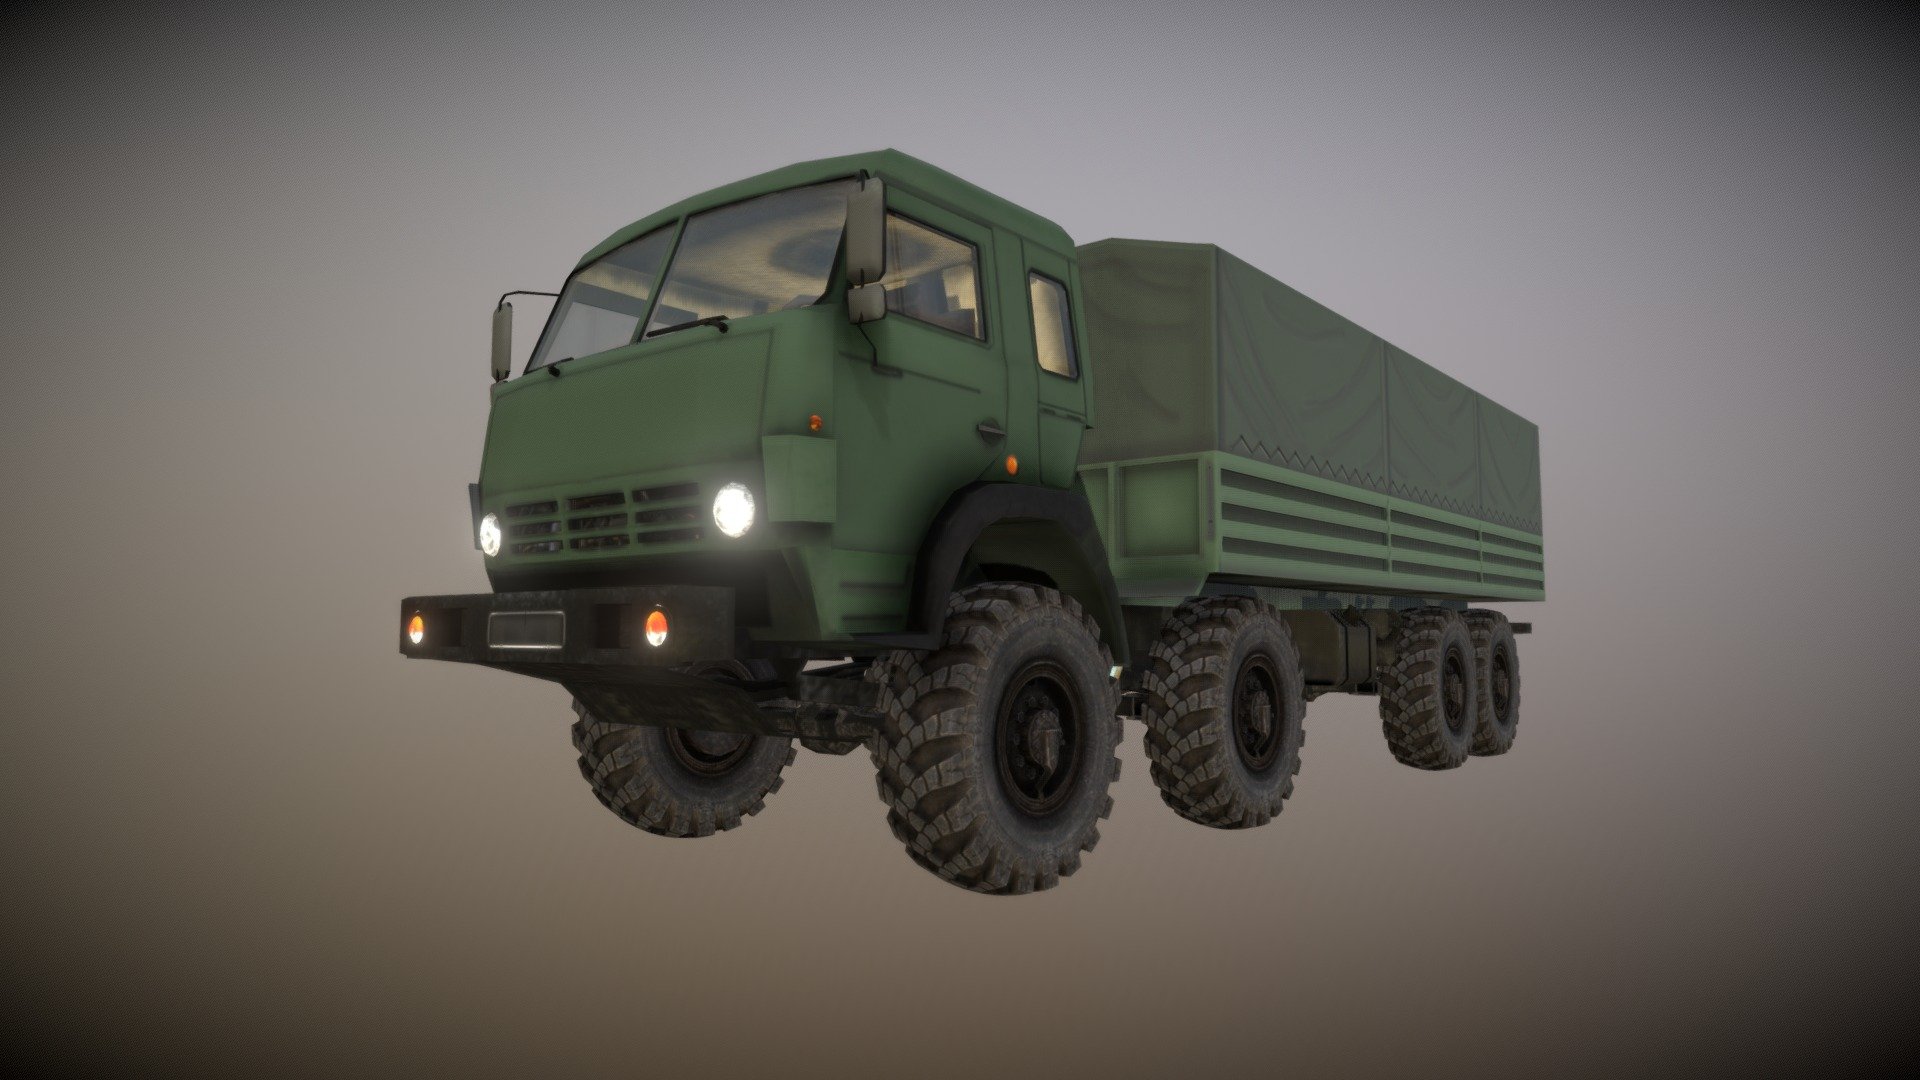 A few amazing models of Russian military trucks will replenish your collection and add variety to your game!
Kamaz 8x8 and Kamaz 6x6 This is the most popular and best. In addition, these trucks have winter and summer colors, as well as a dirty summer and desert color.
In addition, trucks &ldquo;Kamaz